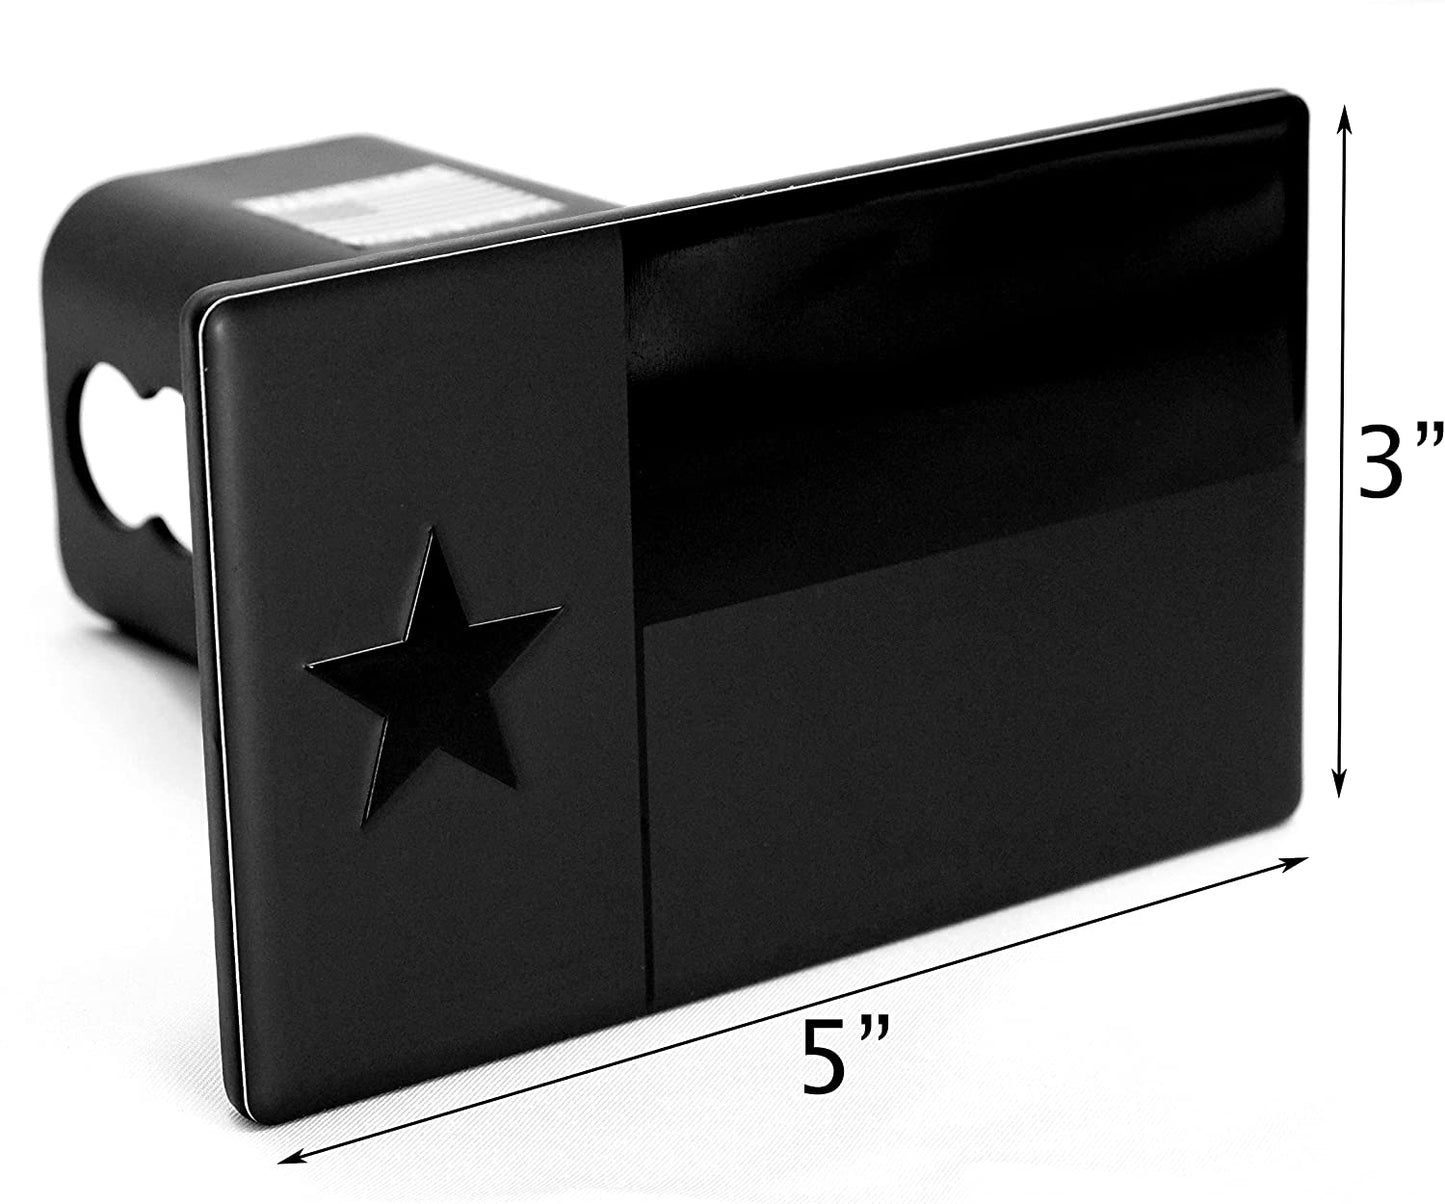 Texas State Flag Metal Hitch Cover (Fits 1.25", 2", 2.5" Receiver, Black)